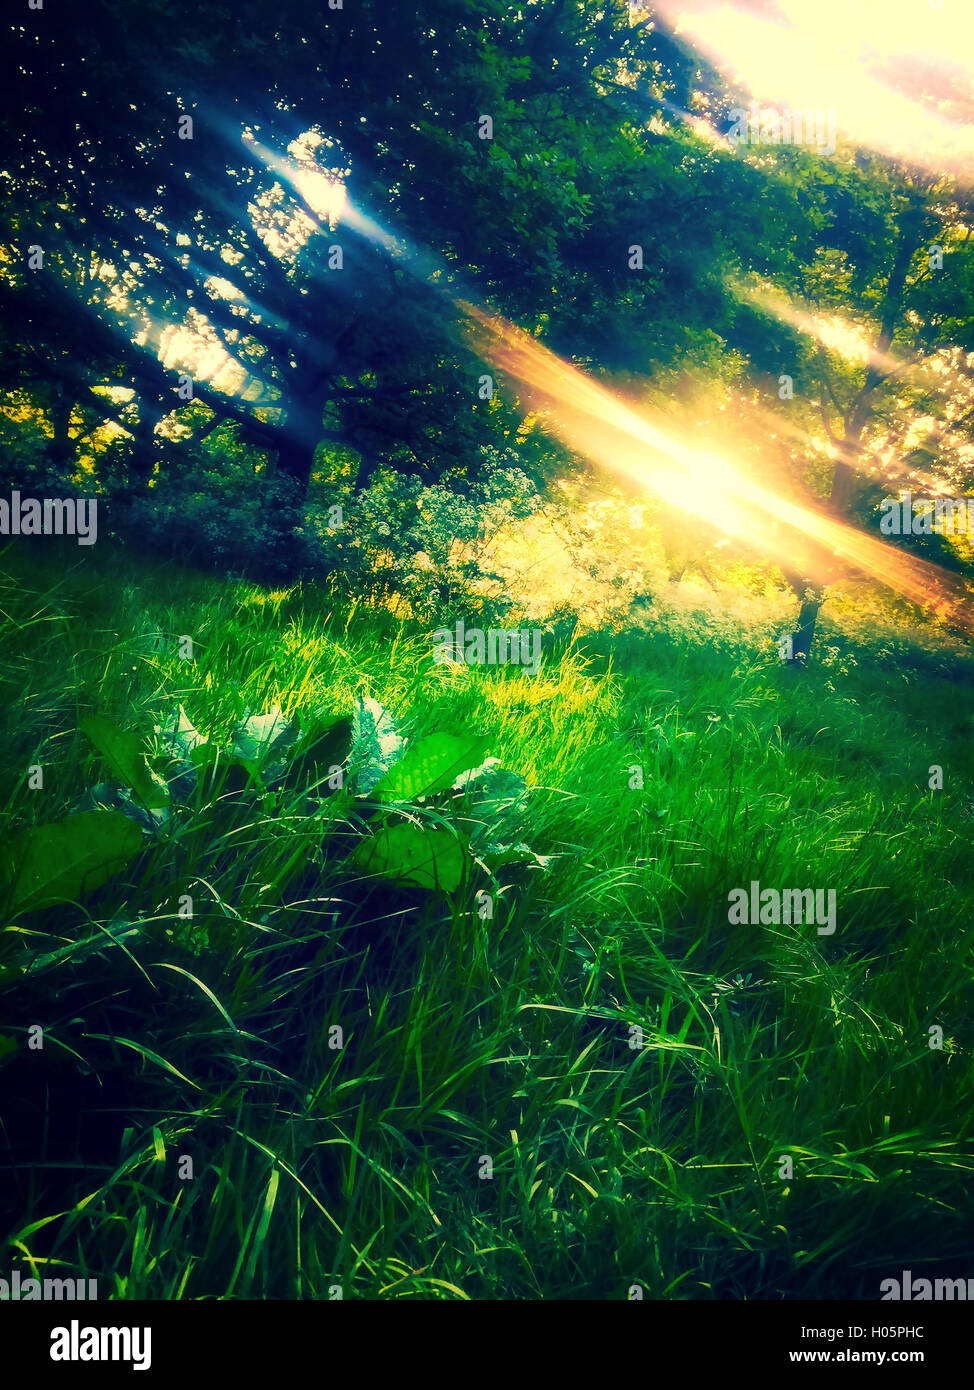 View of summer glade with grass and trees and sunbeams coming through the leaves of the trees Stock Photo